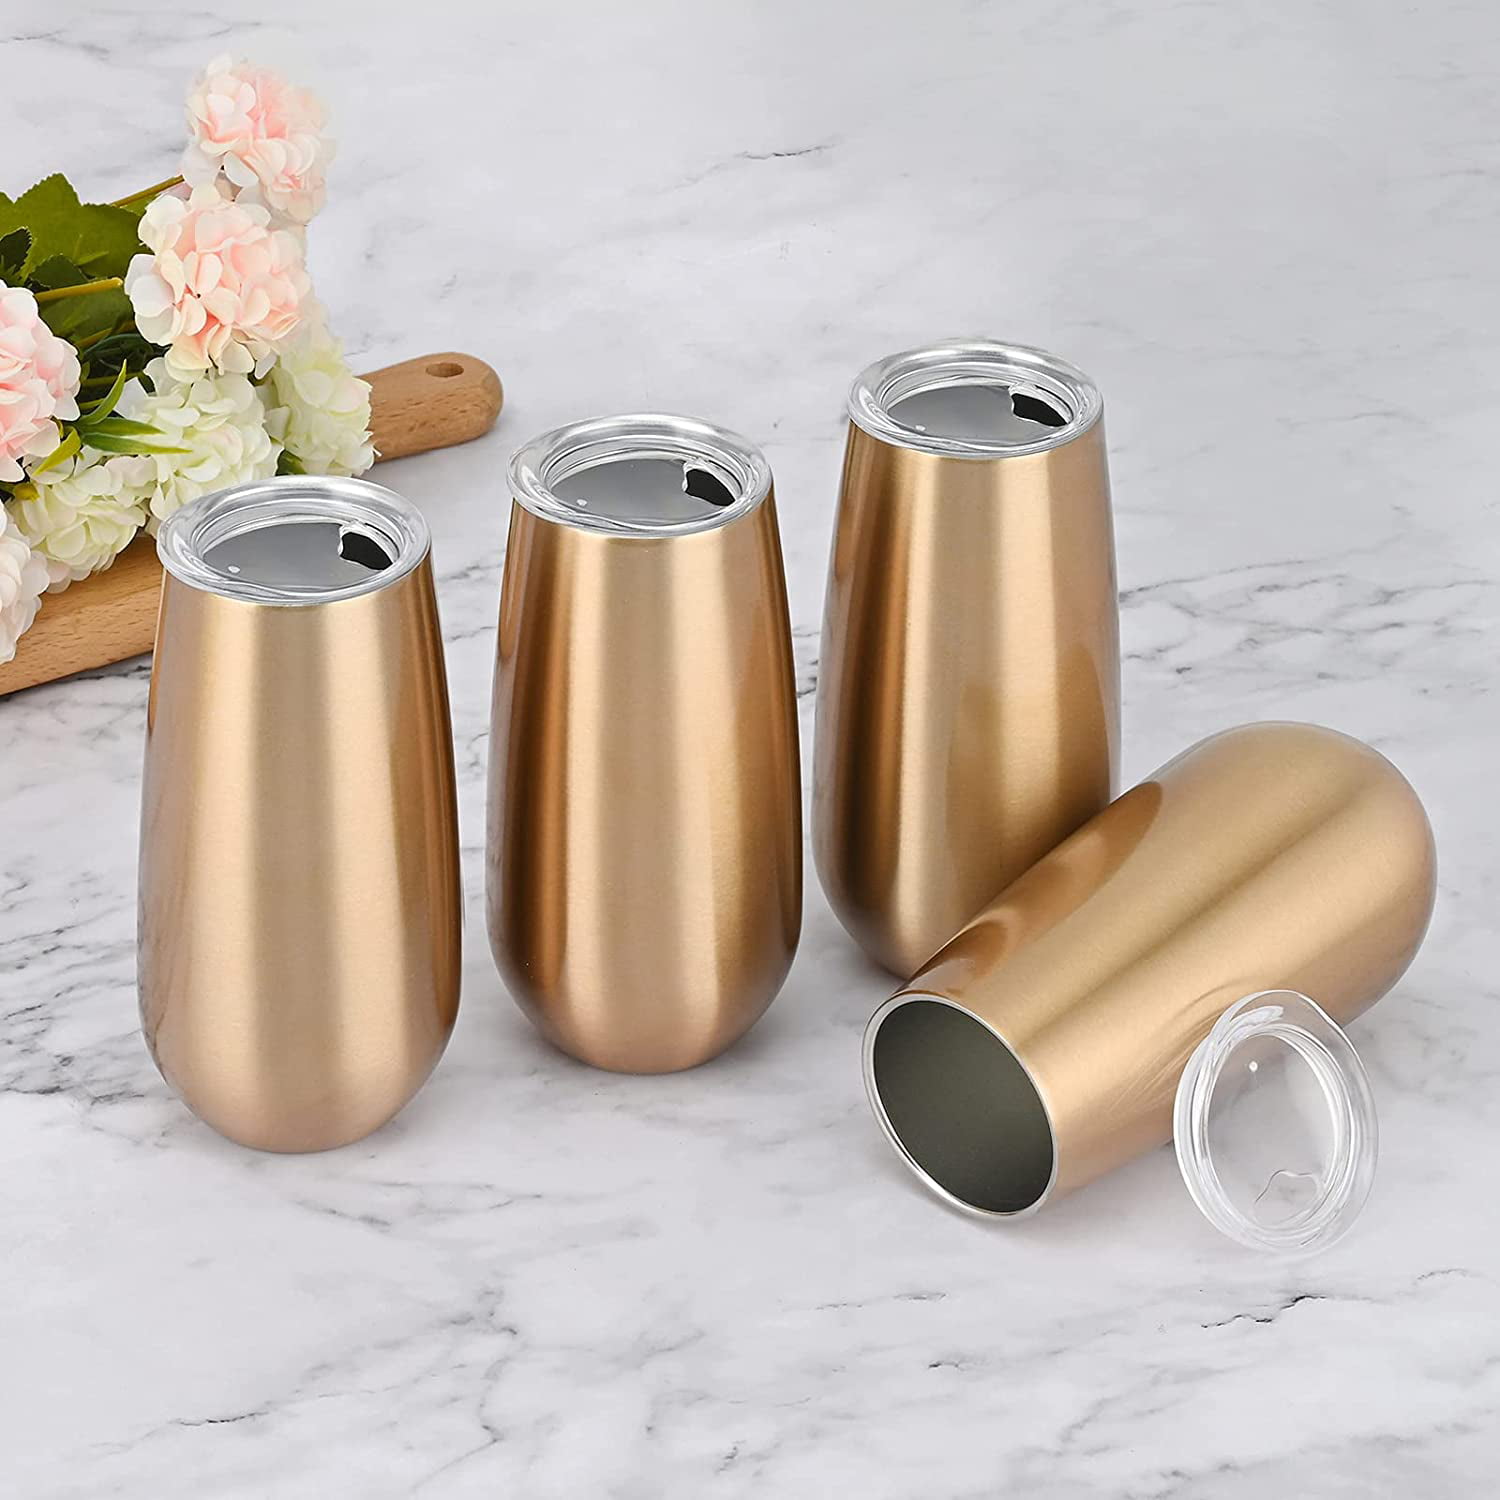 Unbreakable Cocktail Cups with Lid Stemless Champagne Tumbler 6 Oz 6 Pack Champagne Insulated Tumblers Gold Gift for Family Friends Christmas Birthday Wedding Champagne Flutes Wine Tumbler 